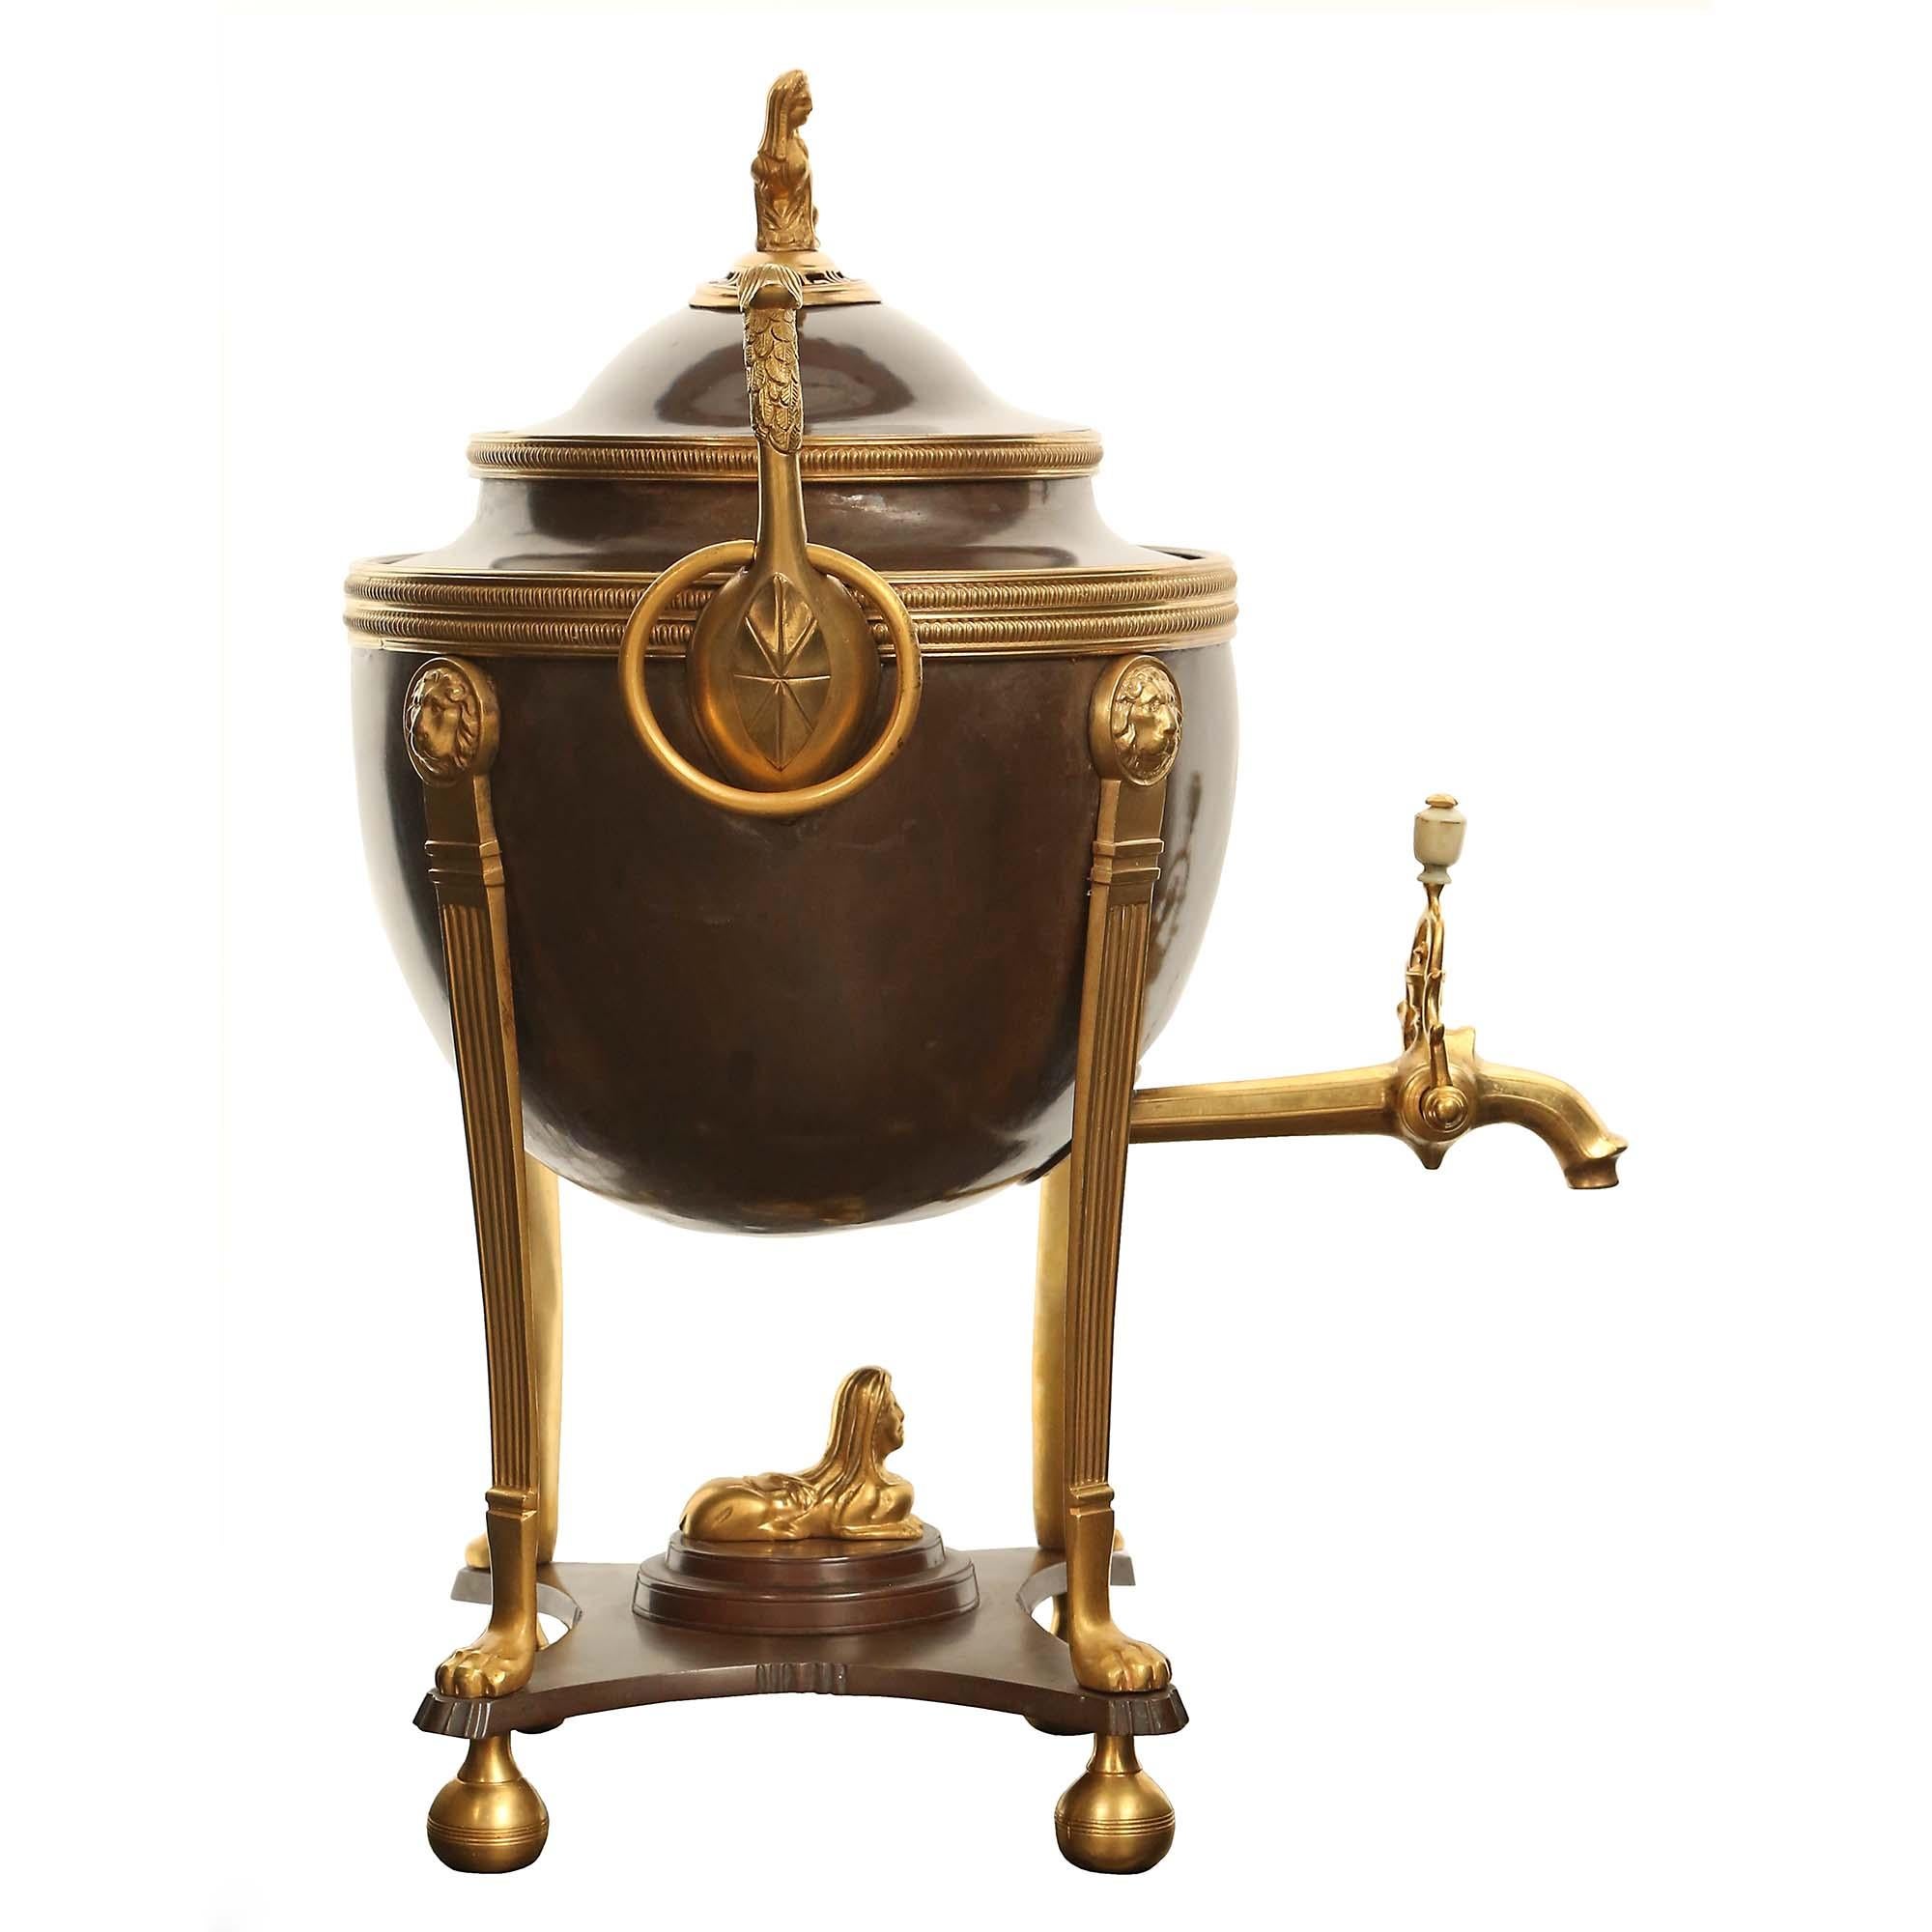 An exquisite French 19th century neo-classical st. patinated bronze and ormolu Samovar. Raised on ormolu ball feet below a bronze tier with concave sides and stepped platform, centered by an ormolu sphinx. Four impressive ormolu fluted supports with